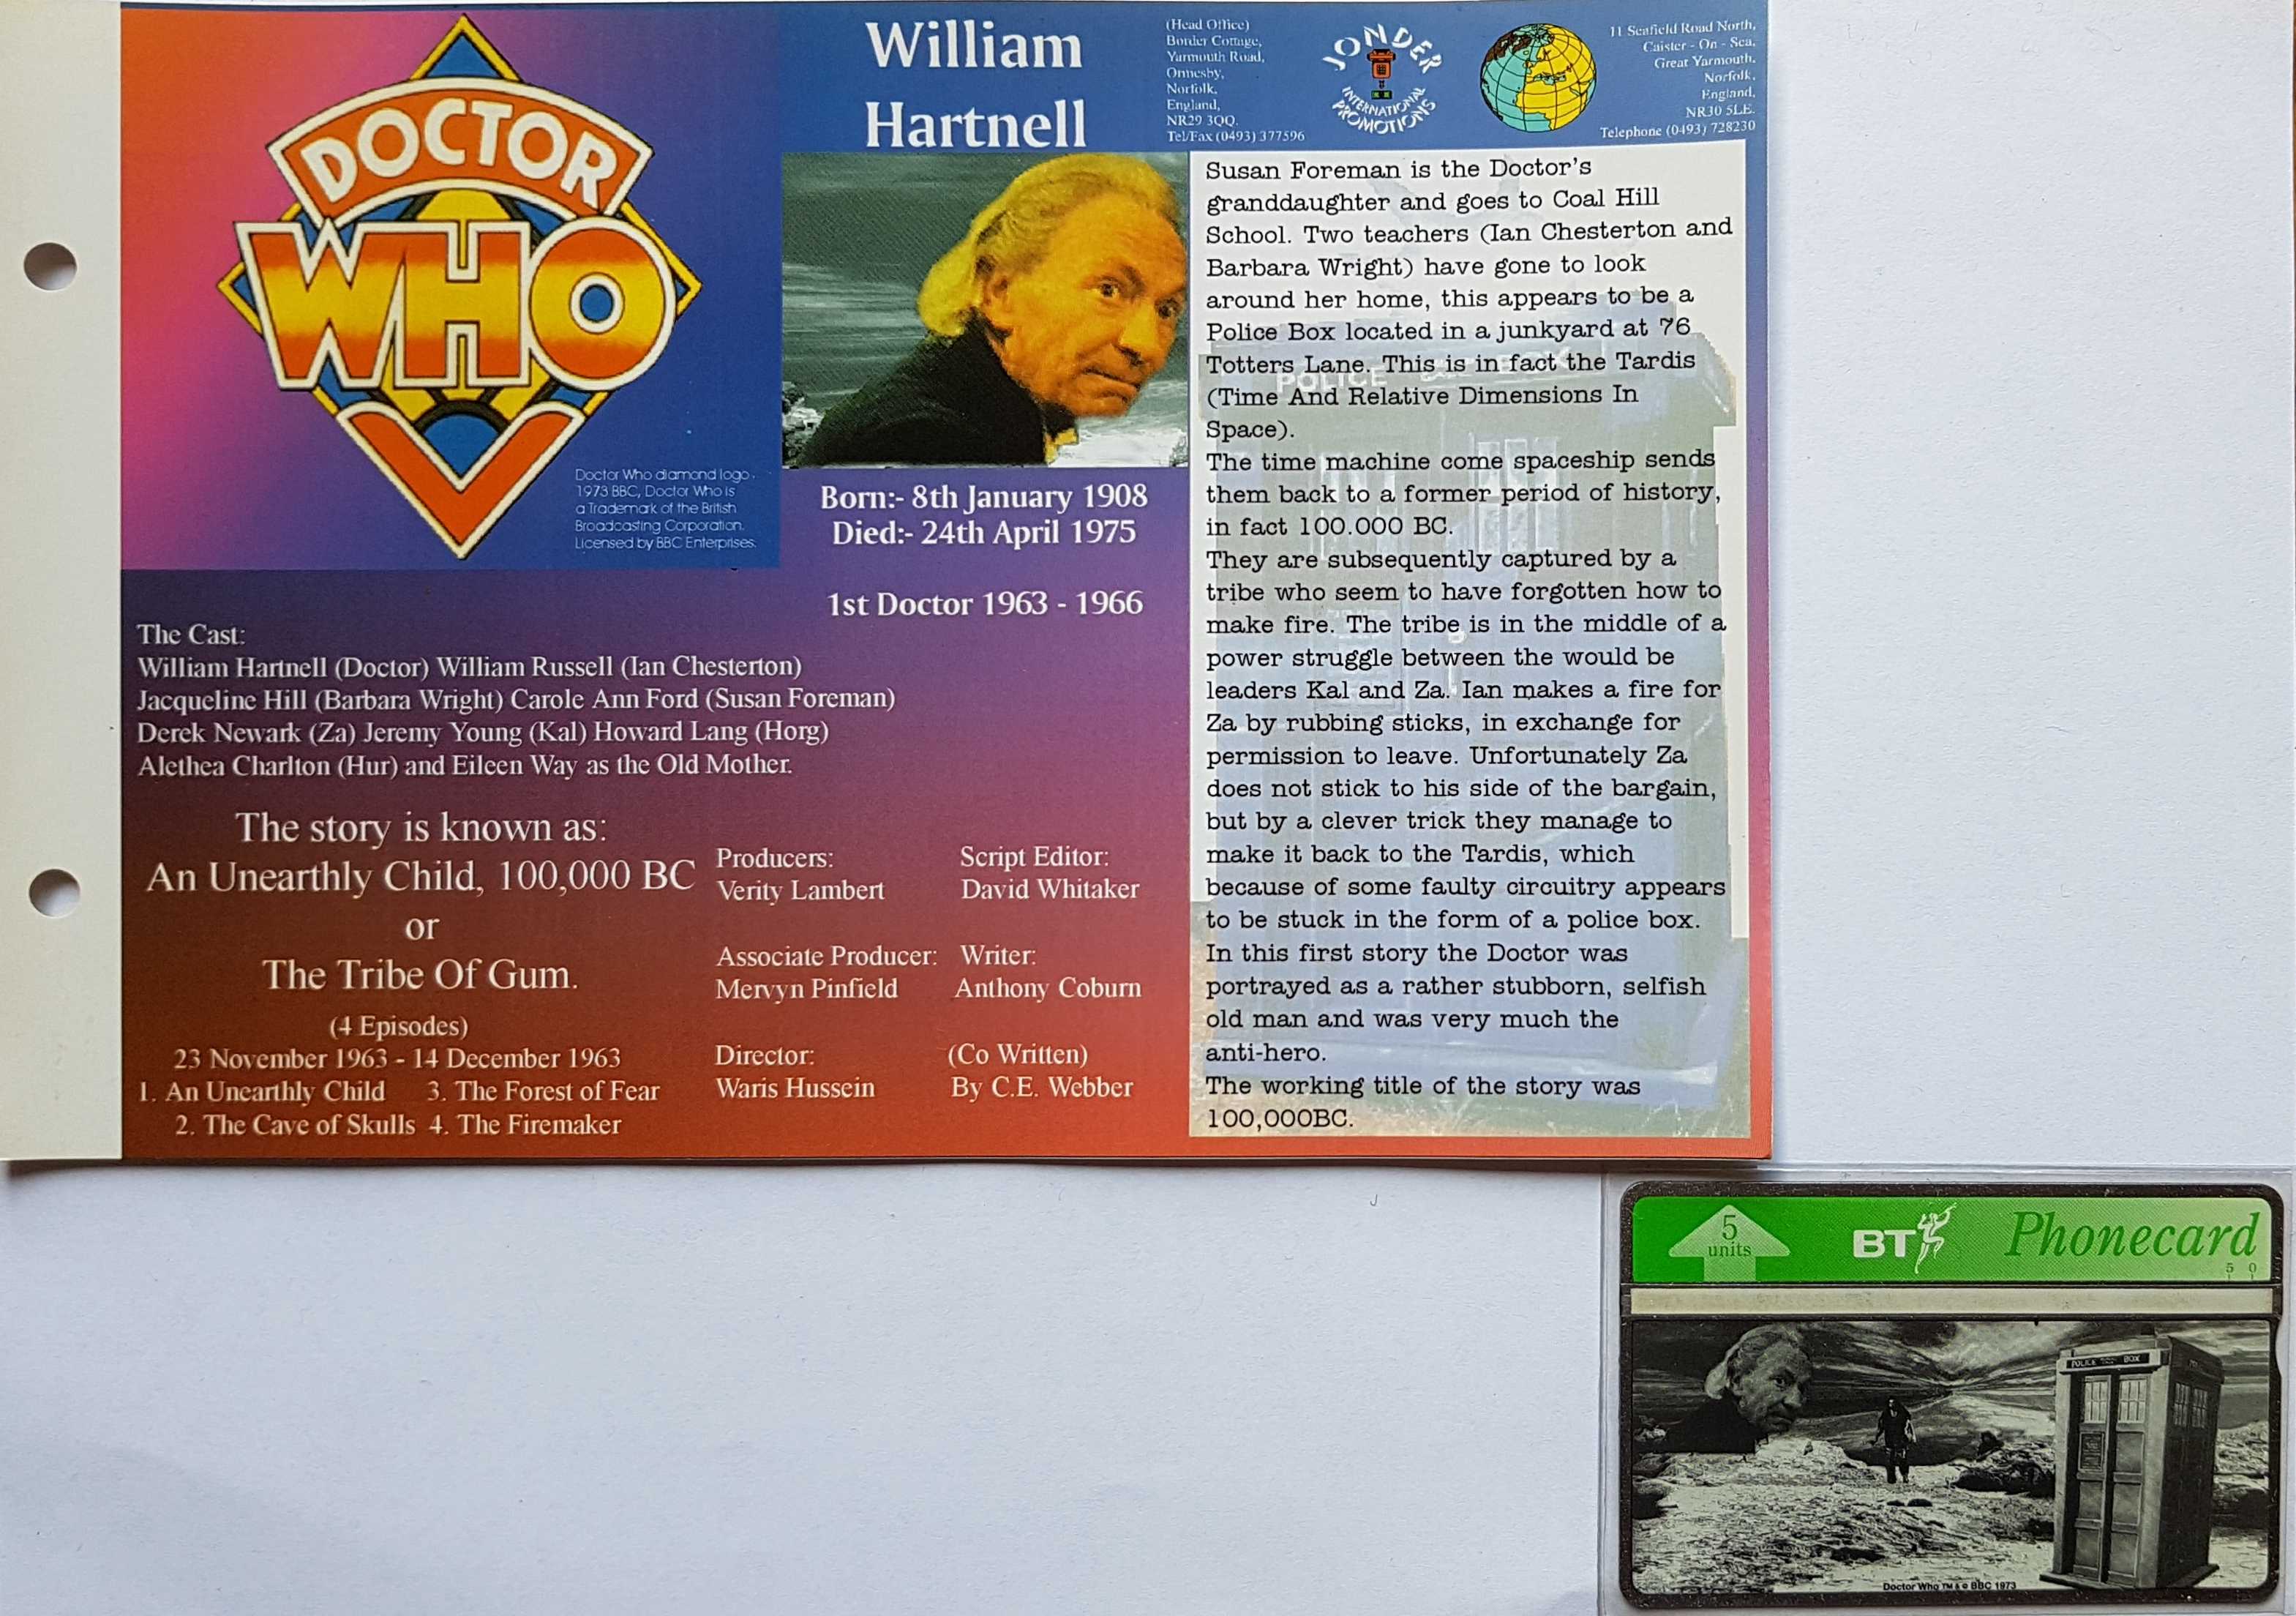 Picture of PC-BTG448 Doctor Who - An unearthly child - Phone card by artist  from the BBC records and Tapes library